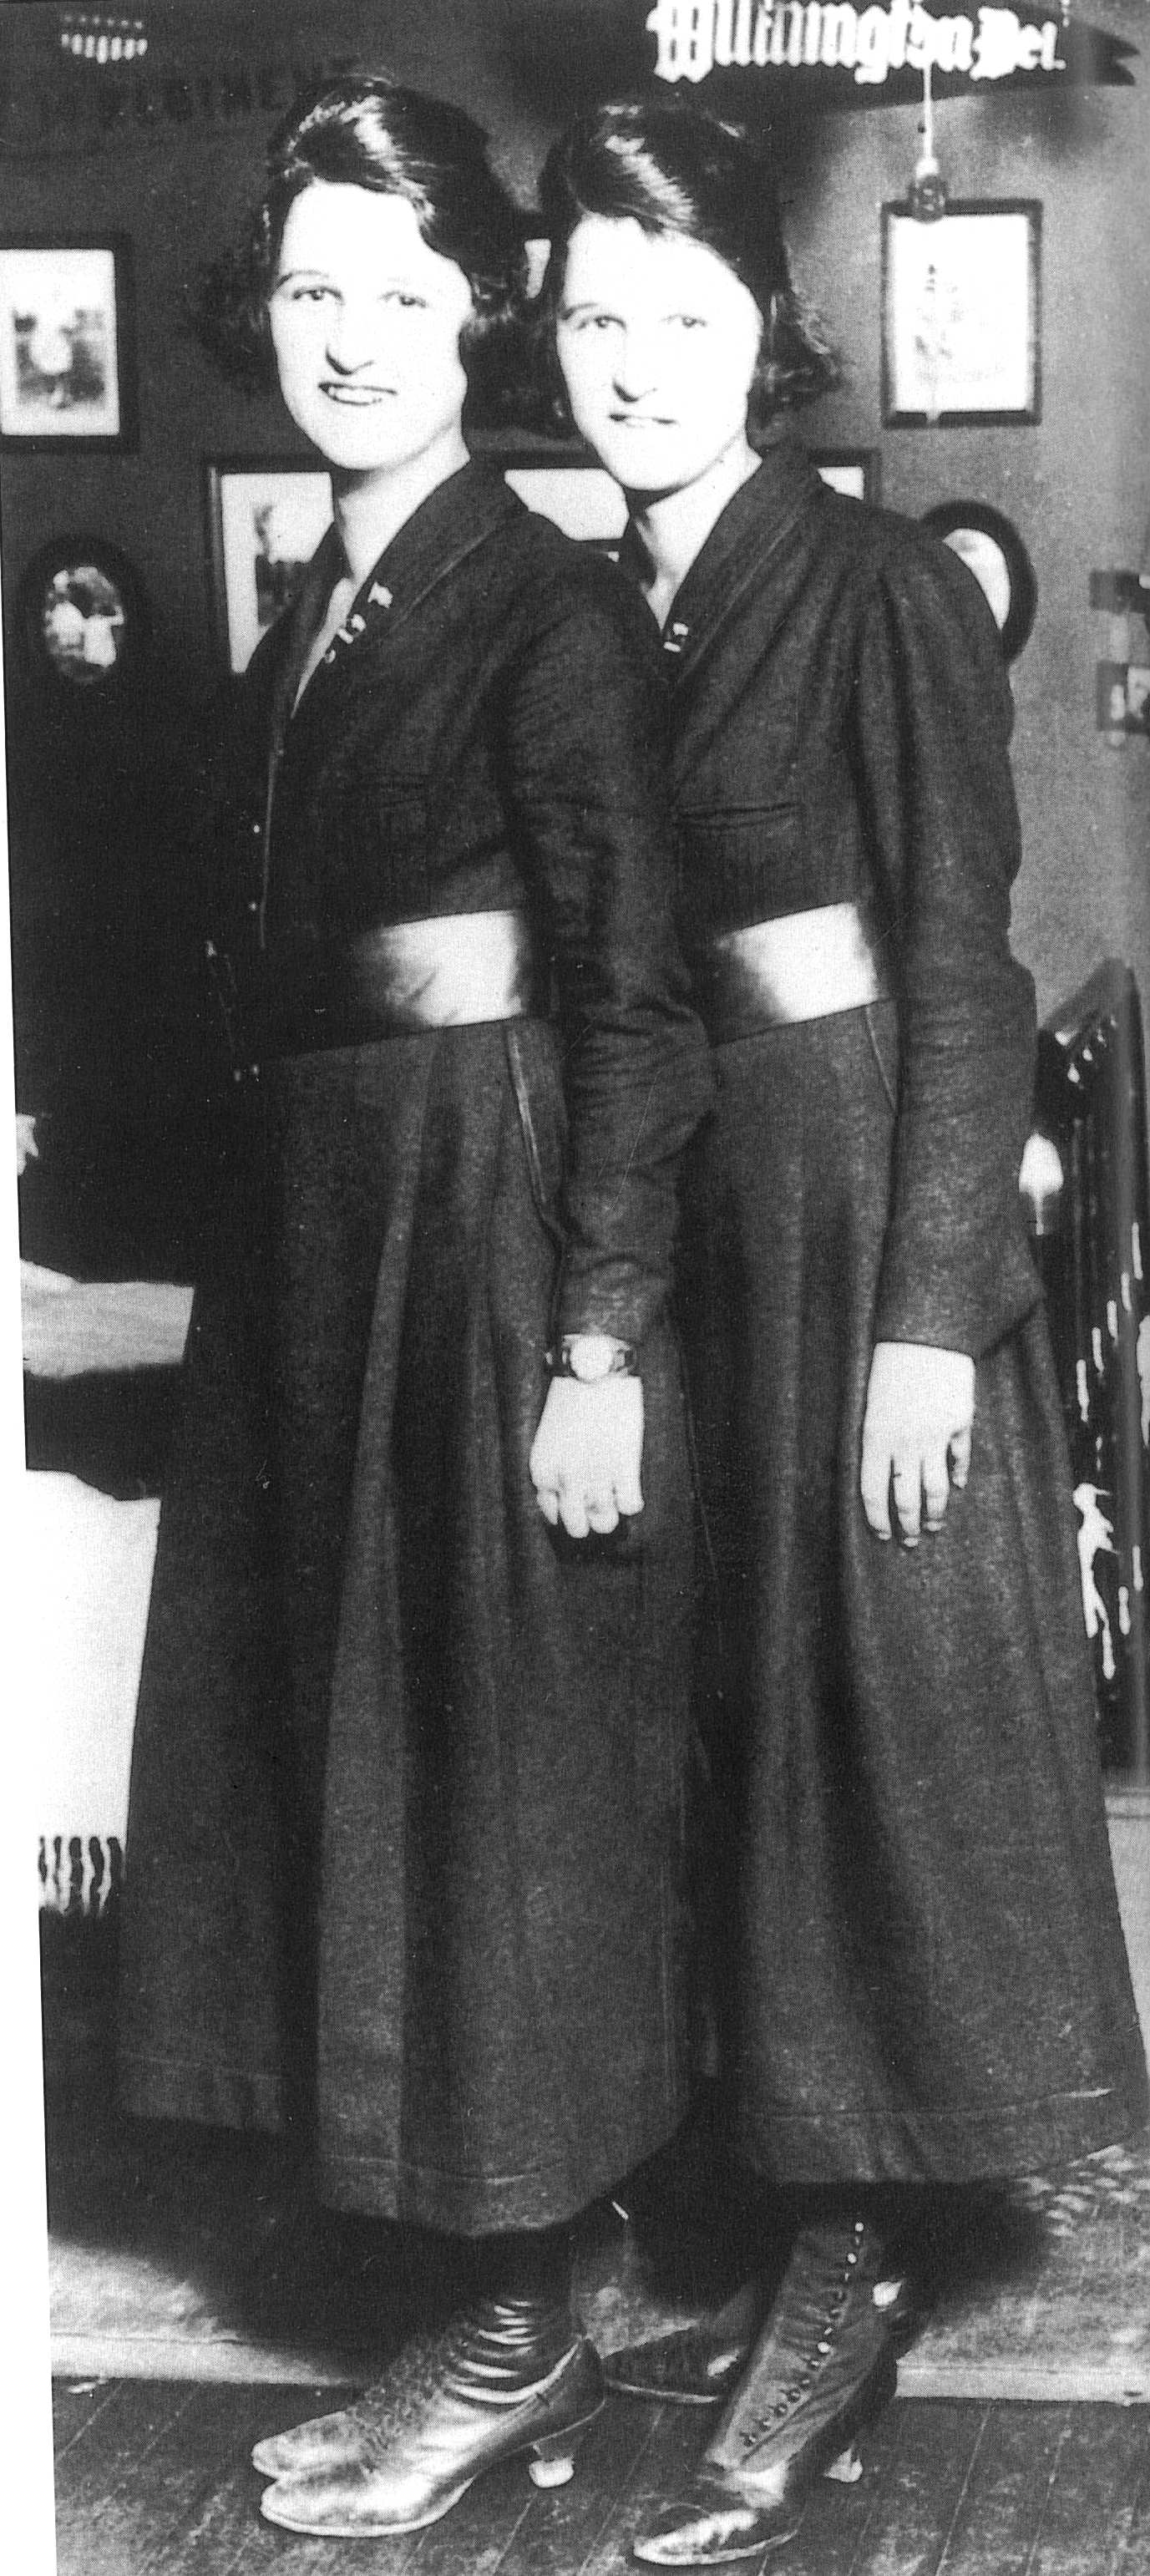 6.	Coast Guard “yeomanettes” Genevieve and Lucille Baker, the first uniformed women to serve in the Coast Guard. (Coast Guard Collection)